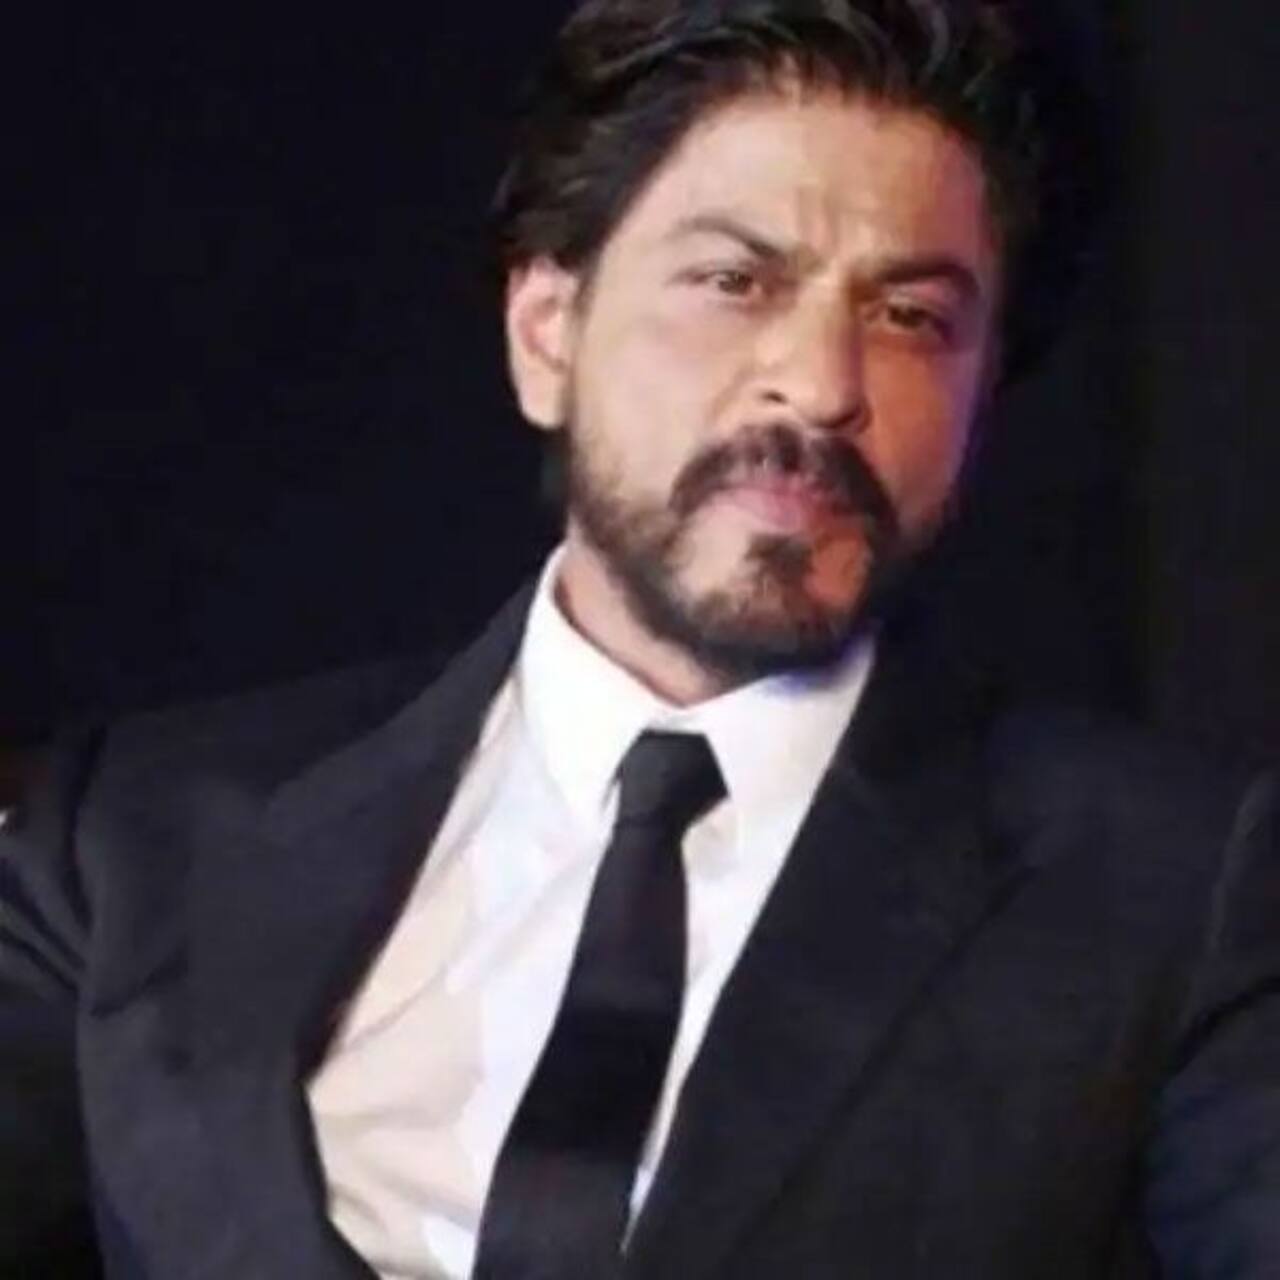 Shah Rukh Khan to play father-son double role in Atlee's film ⁠— read details